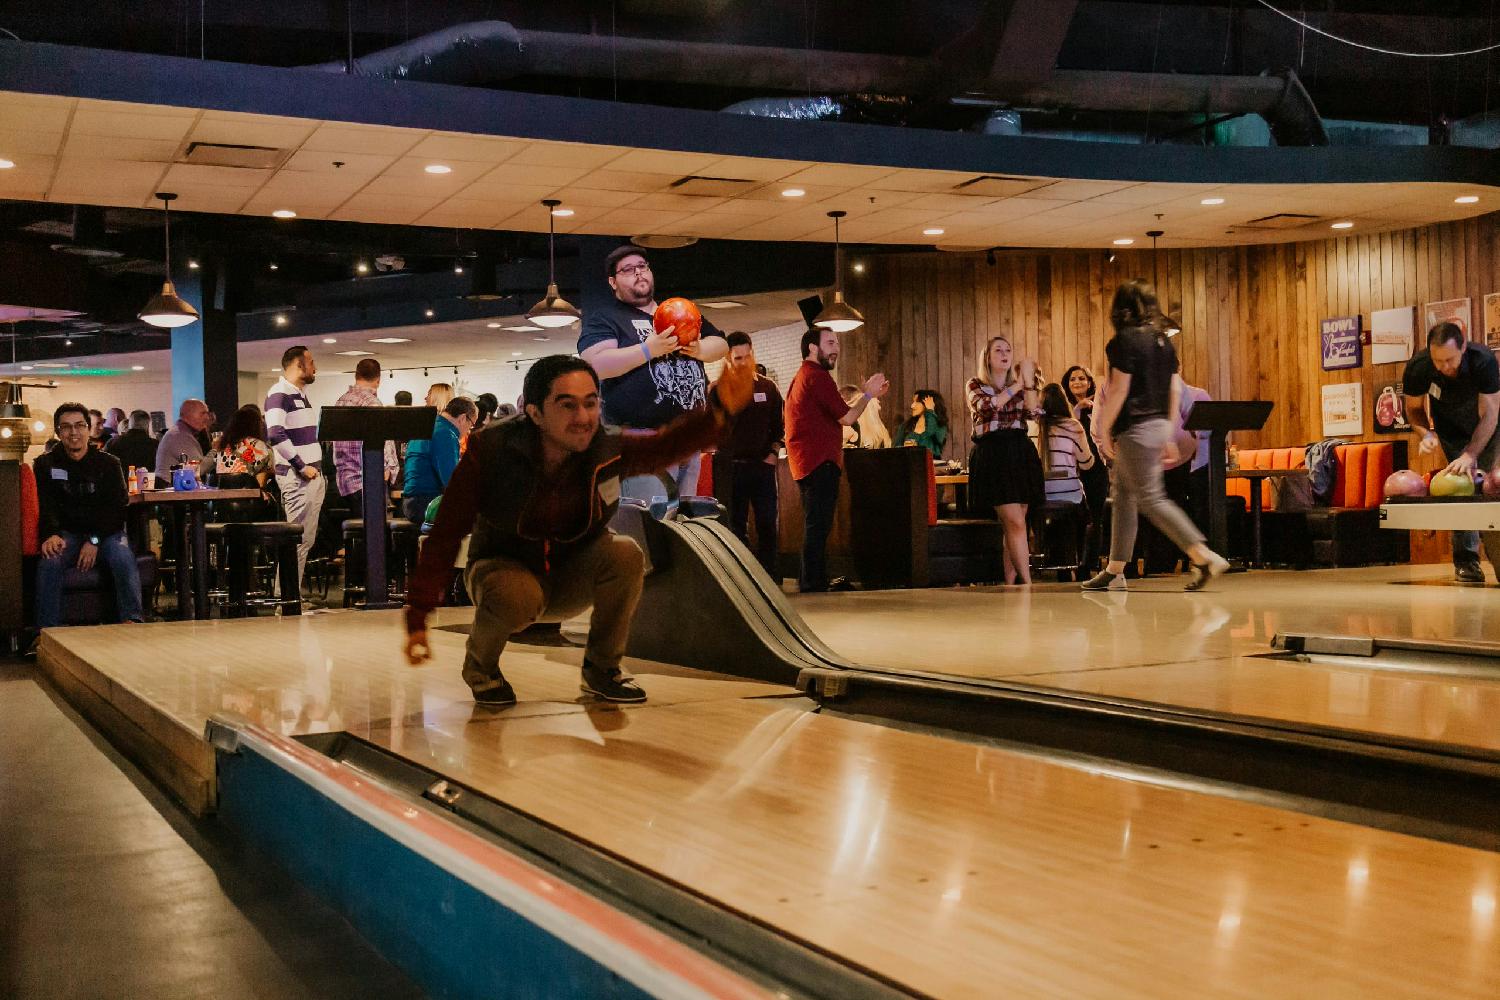 Company bowling is always a fun time!